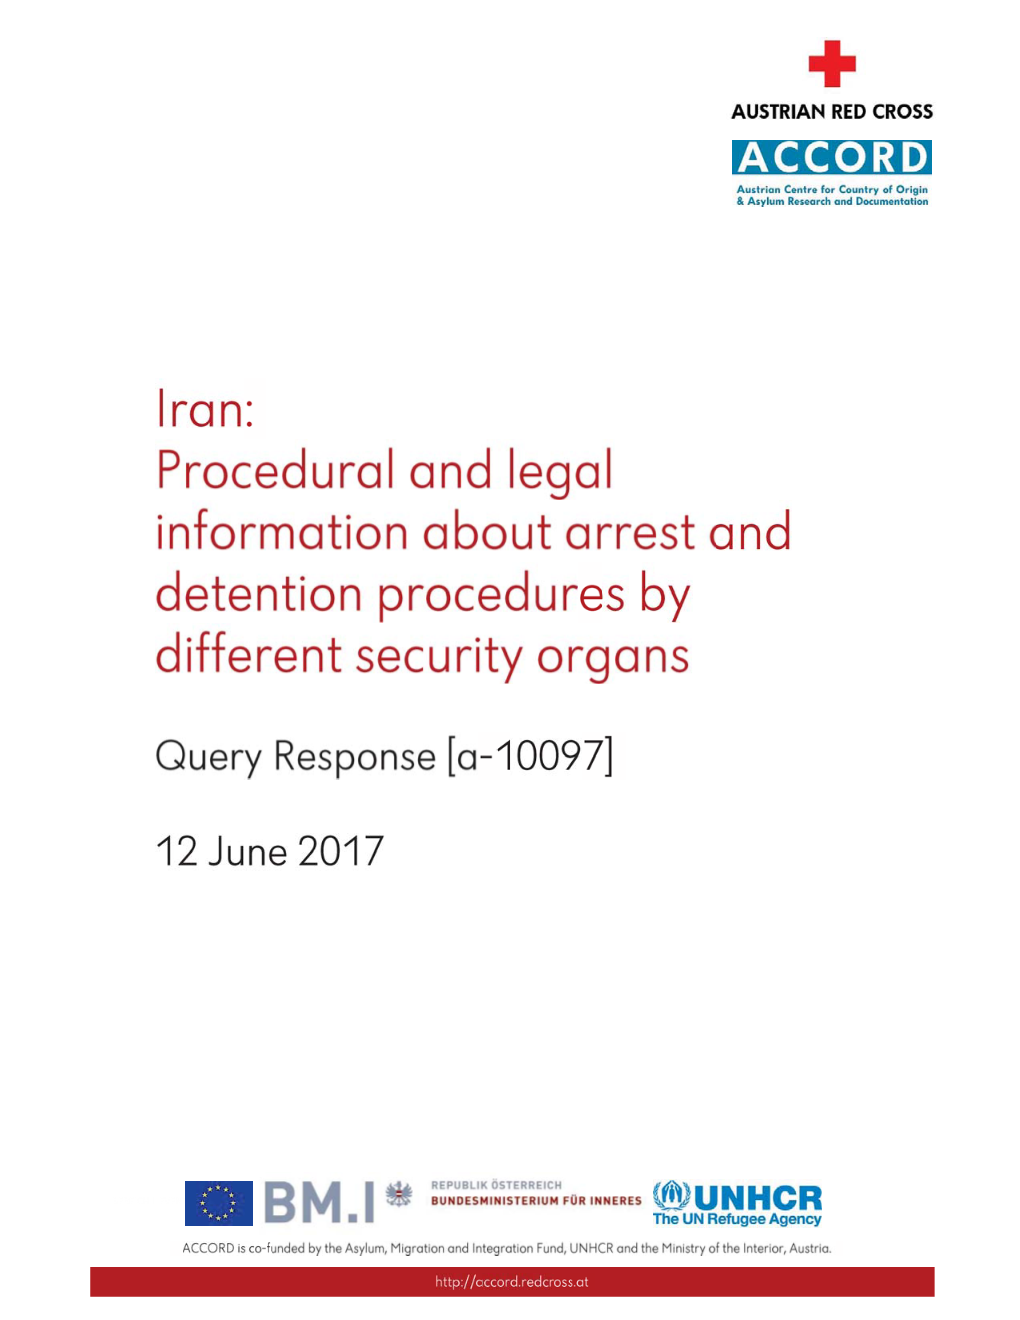 Iran: Procedural and Legal Information About Arrest and Detention Procedures by Different Security Organs Query Response [A-10097] 12 June 2017